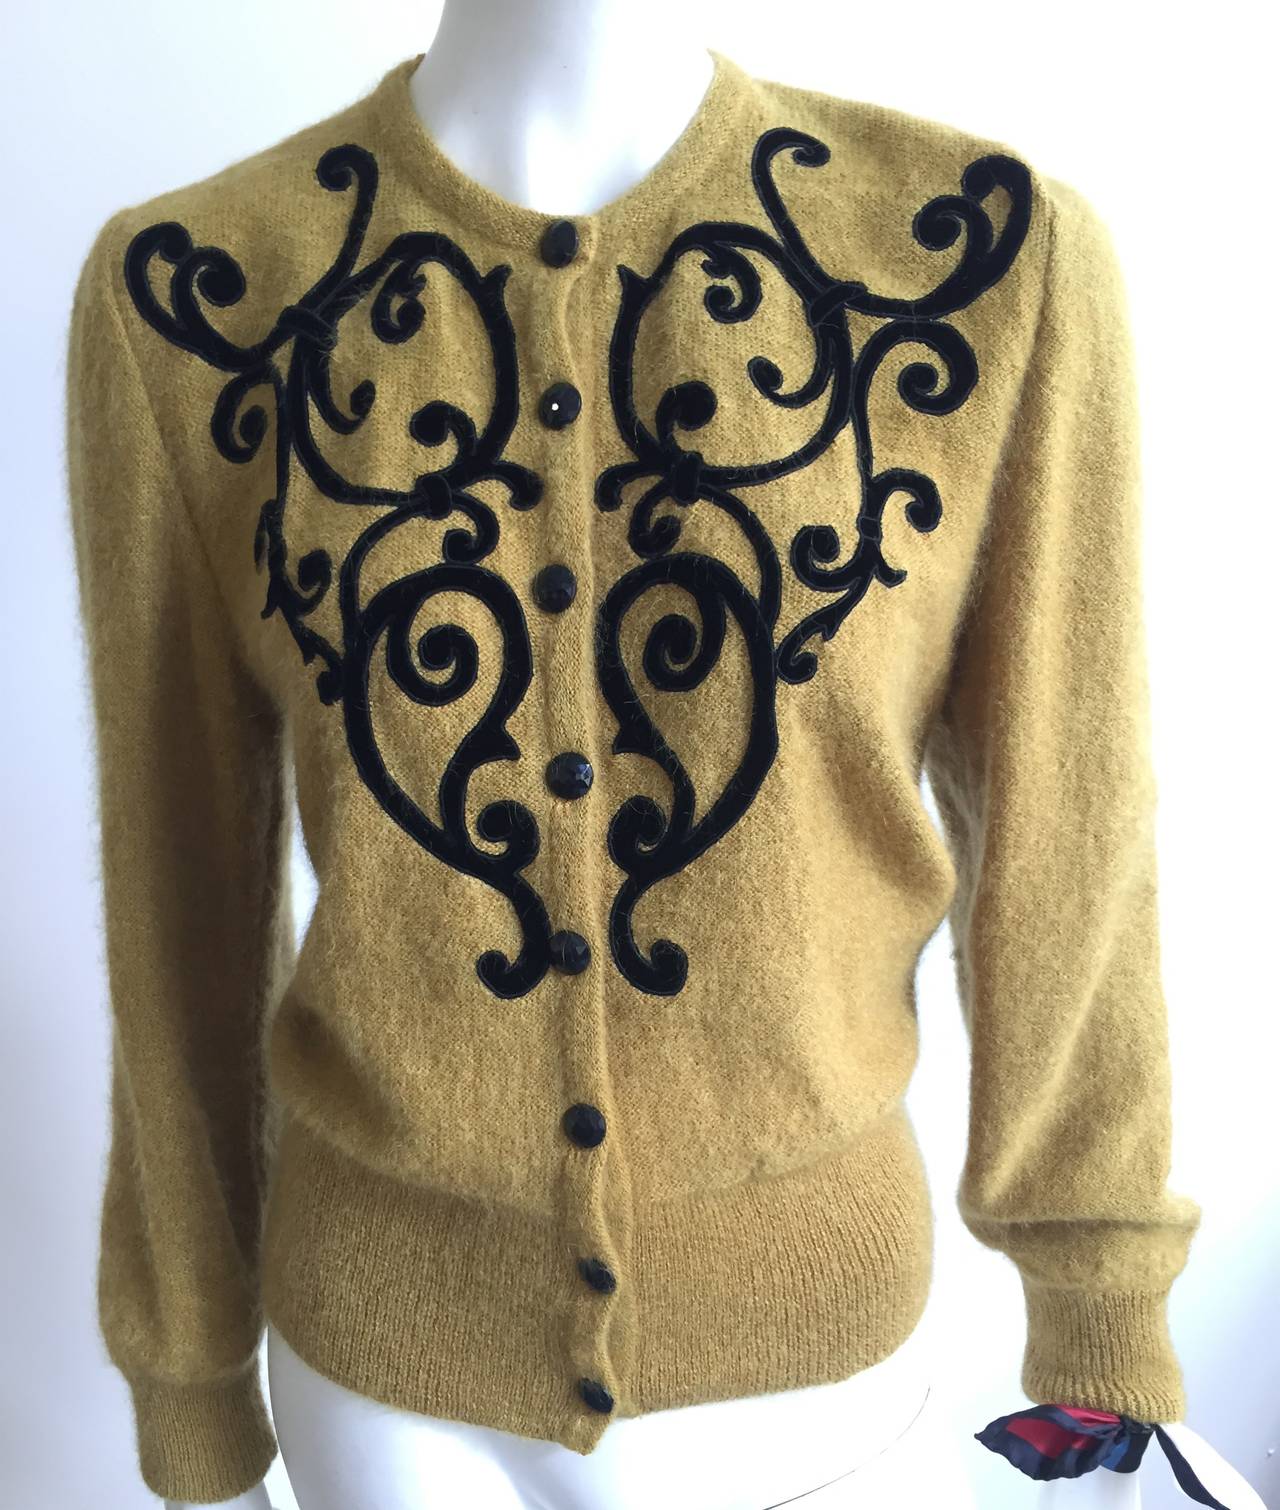 Gucci 1981 mohair & wool button up cardigan sweater with velvet appliqué size medium. This was purchased at the original Gucci store in Florence Italy in 1981. There are 2 extra black buttons inside sweater.  This vintage classic Gucci cardigan